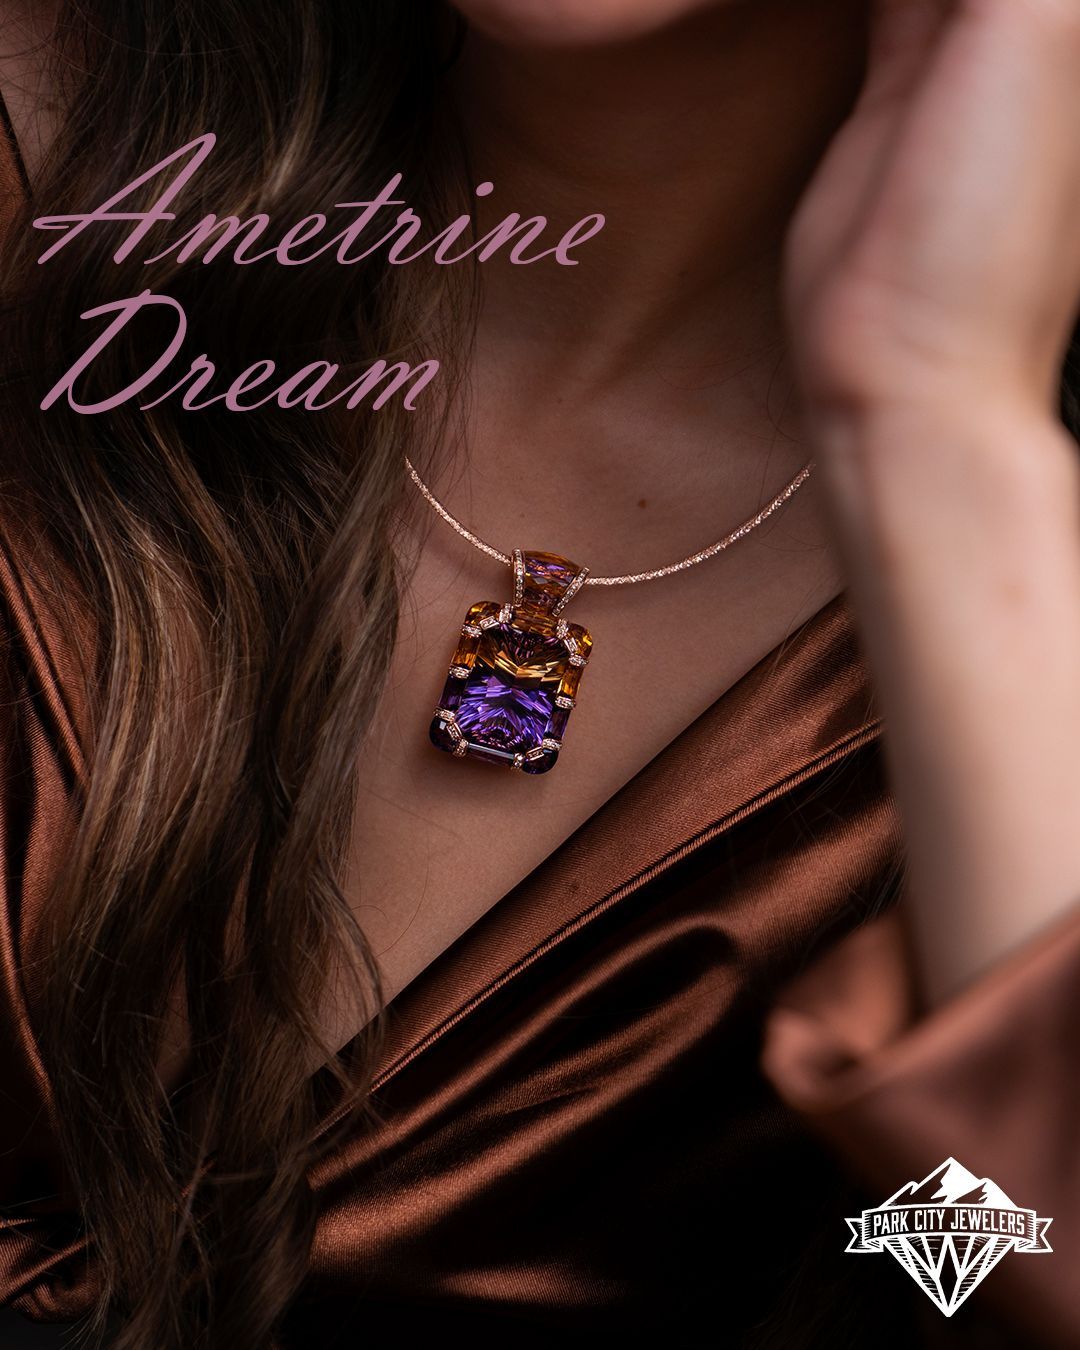 An image of a stunning Bellarri ametrine pendant from Park City Jewelers. The pendant features a vibrant ametrine gemstone, beautifully cut and set in a gold pendant setting. The image showcases the intricate details of the pendant, including the delicate metalwork and the mesmerizing color combination of amethyst and citrine in the gemstone. This Bellarri pendant is a true masterpiece, capturing the essence of elegance and sophistication. A perfect accessory for those seeking a touch of luxury. Visit Park City Jewelers to explore their exquisite collection of fine jewelry.